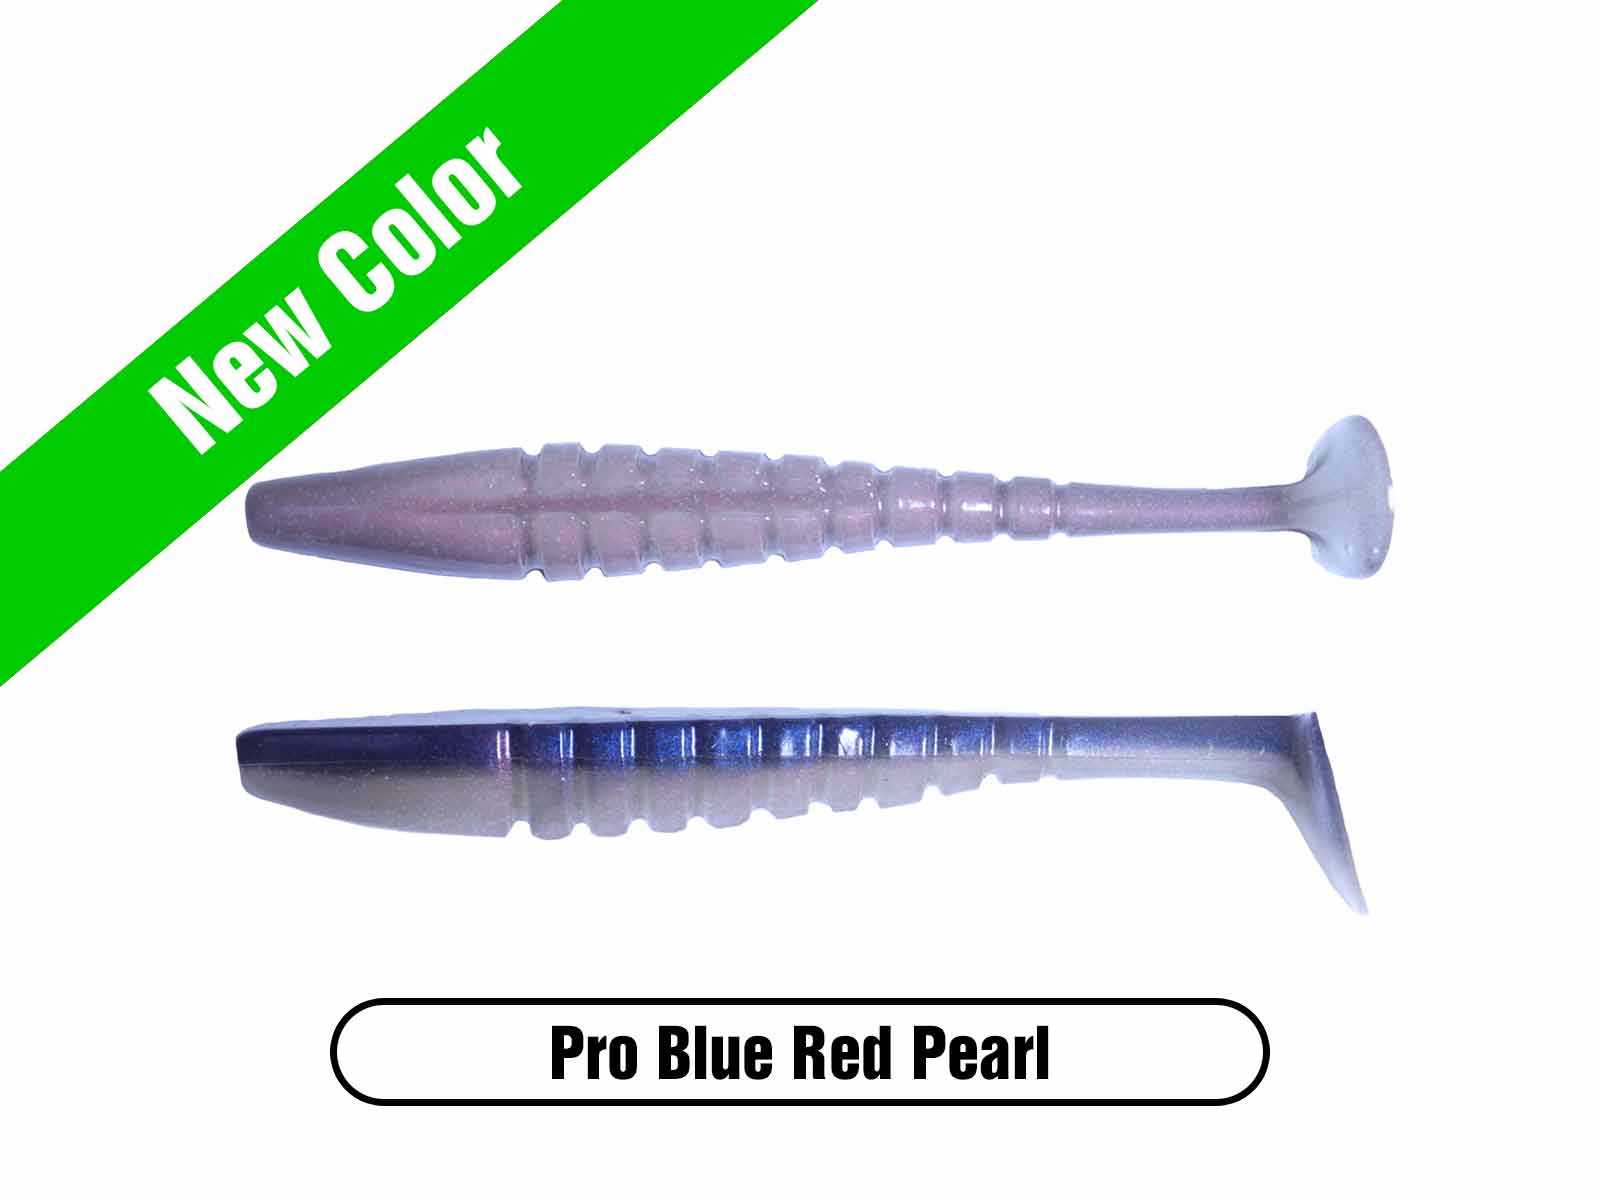 Press Release-X-Zone Pro Series Lures Continues with RB BASS